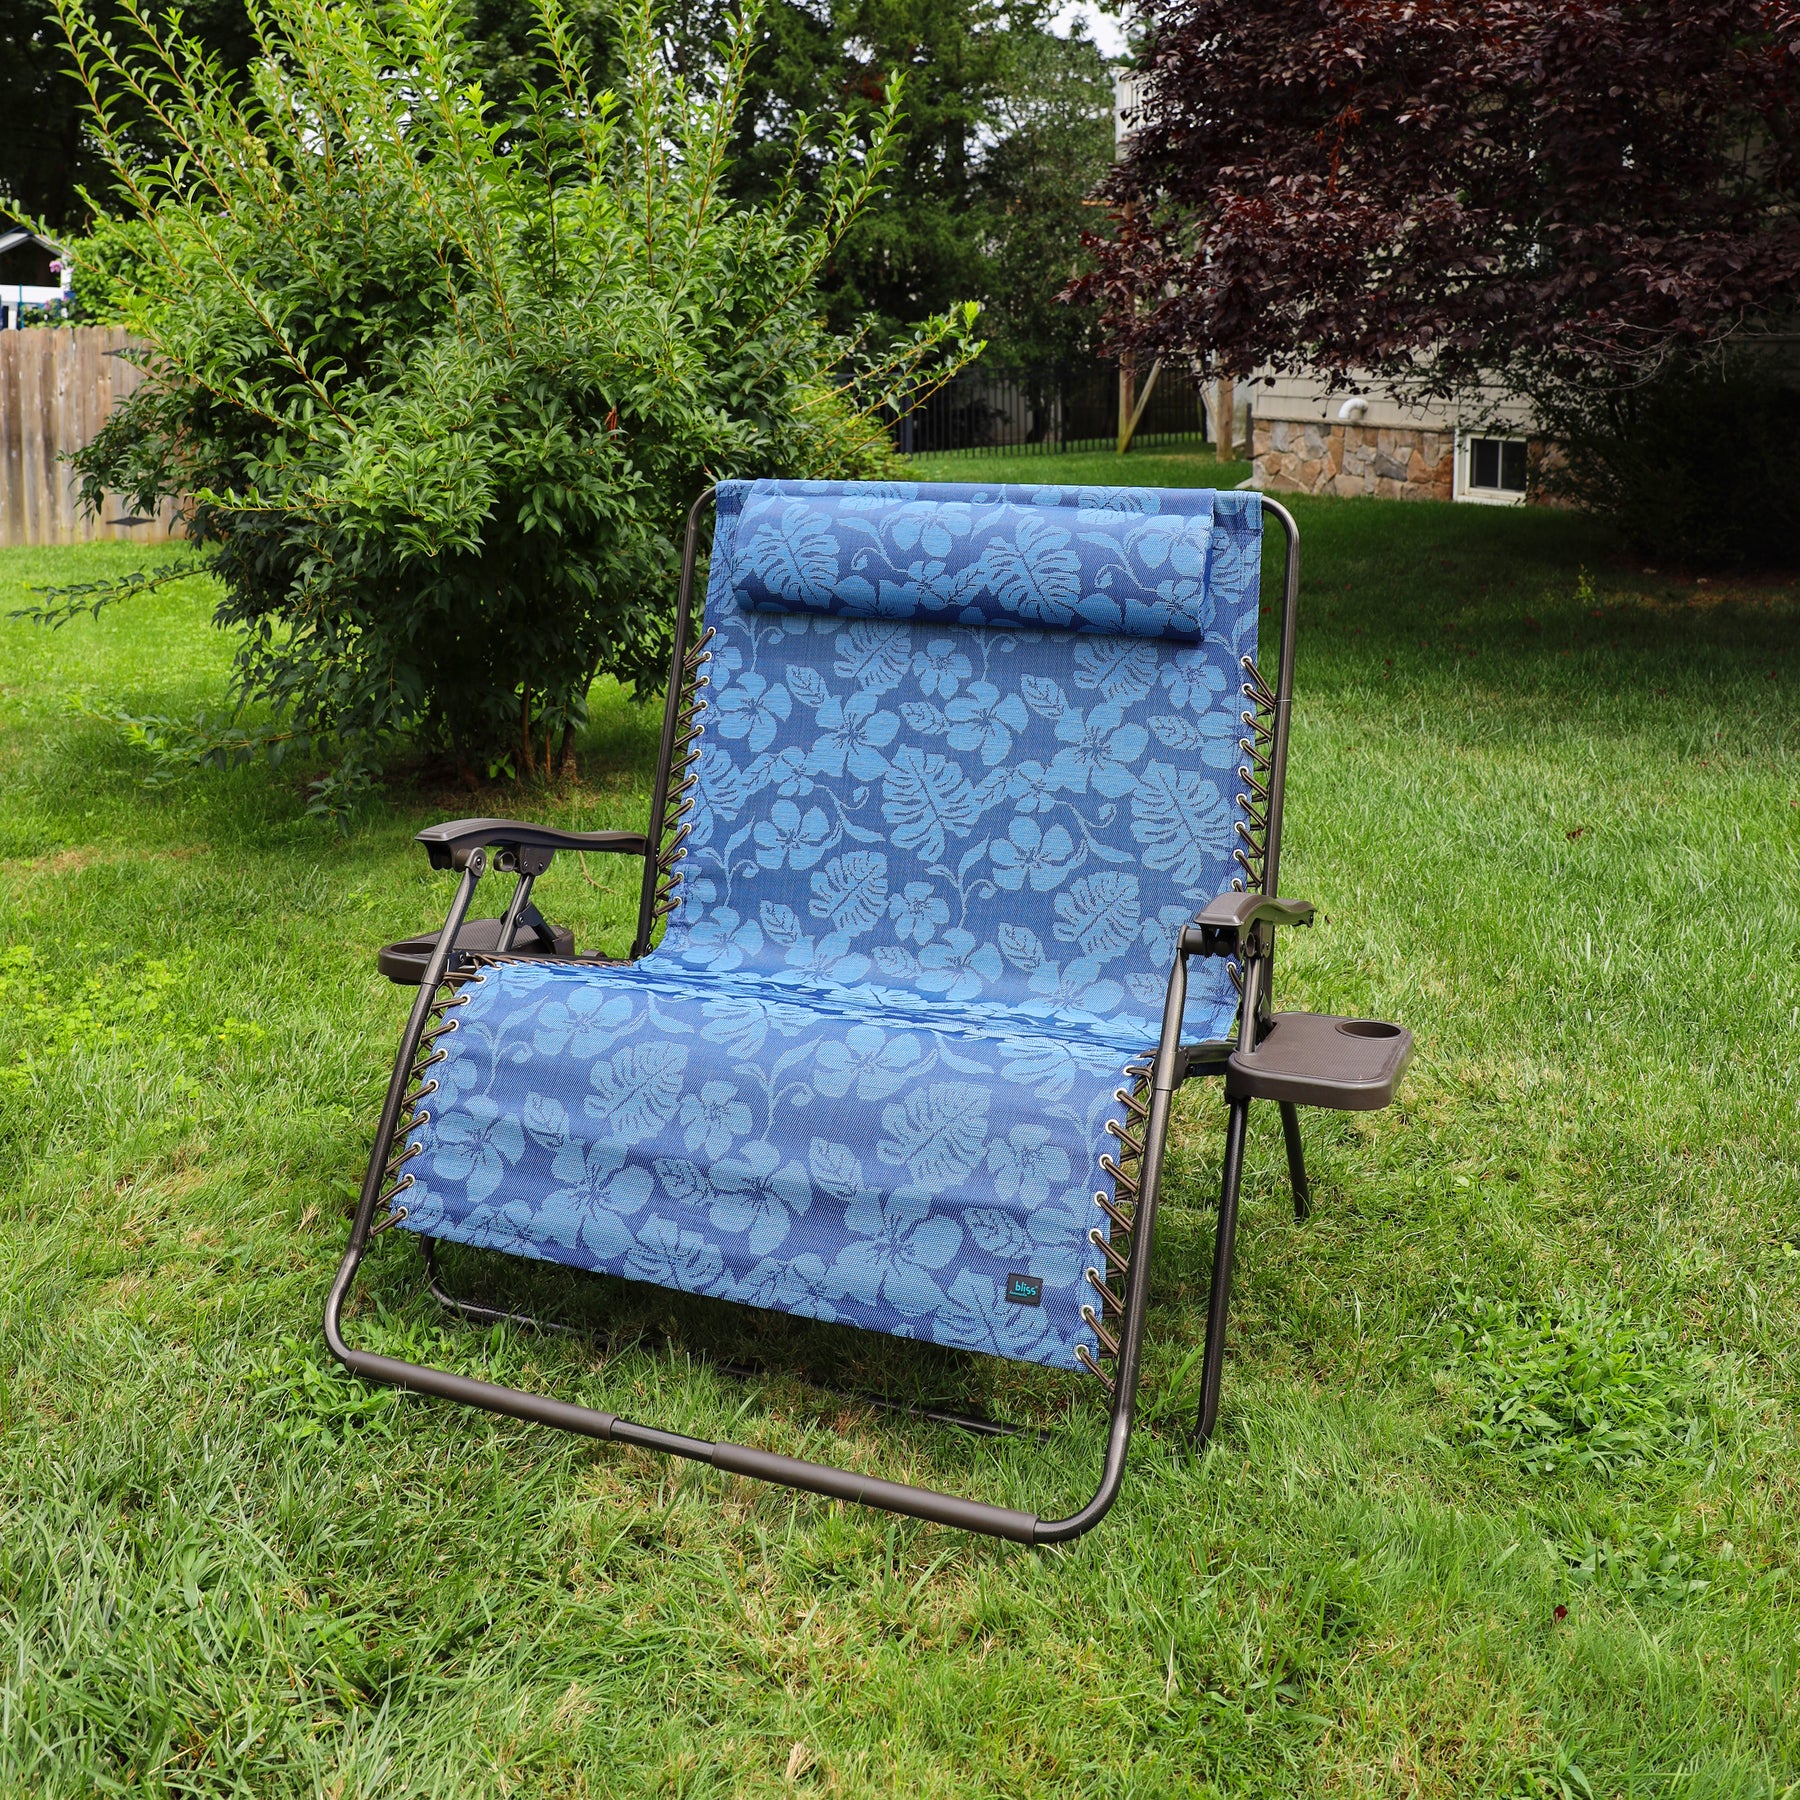 45-inch 2-Person Blue Flower Zero Gravity Chair on a lawn.